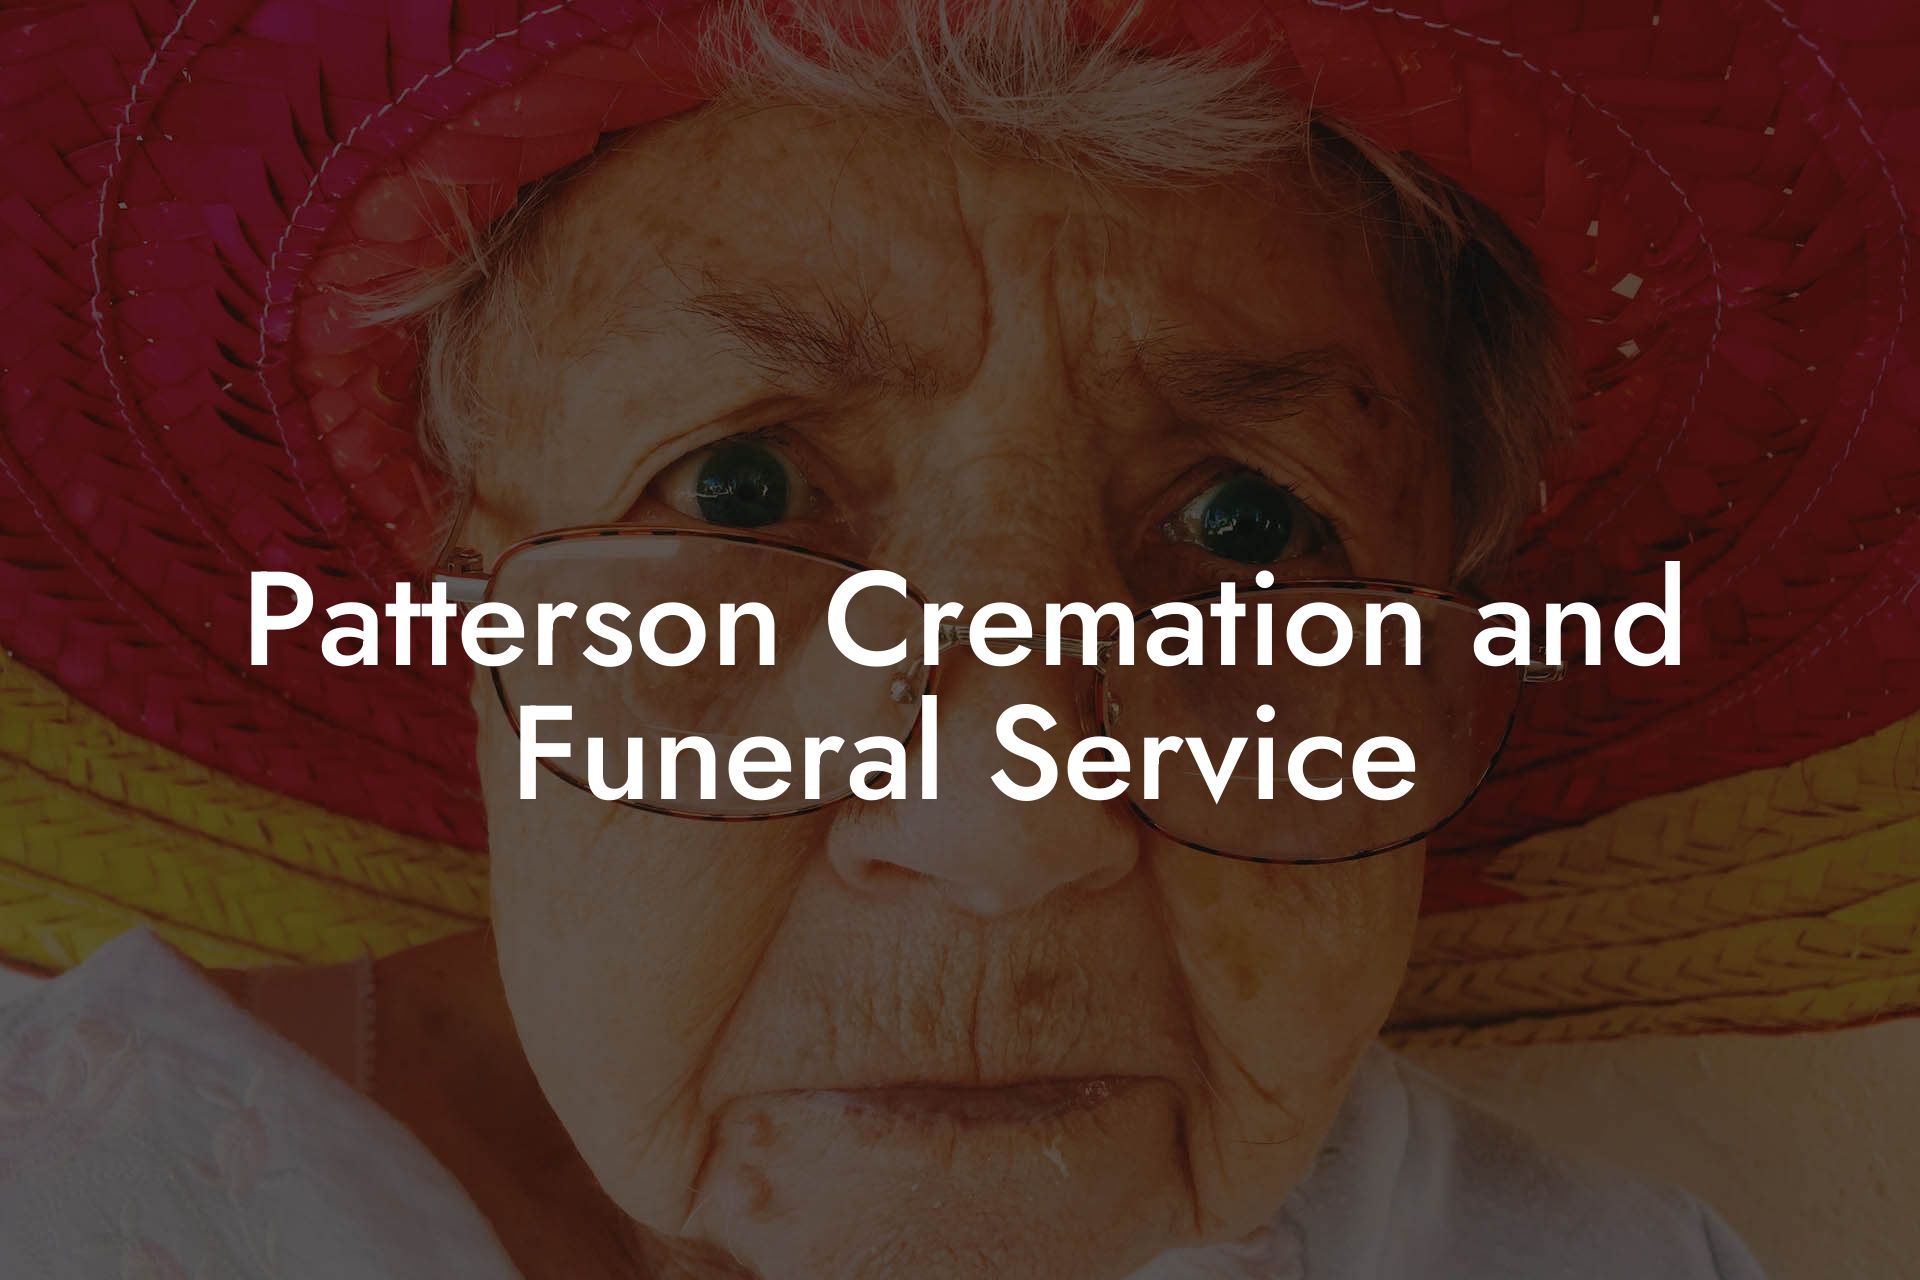 Patterson Cremation and Funeral Service